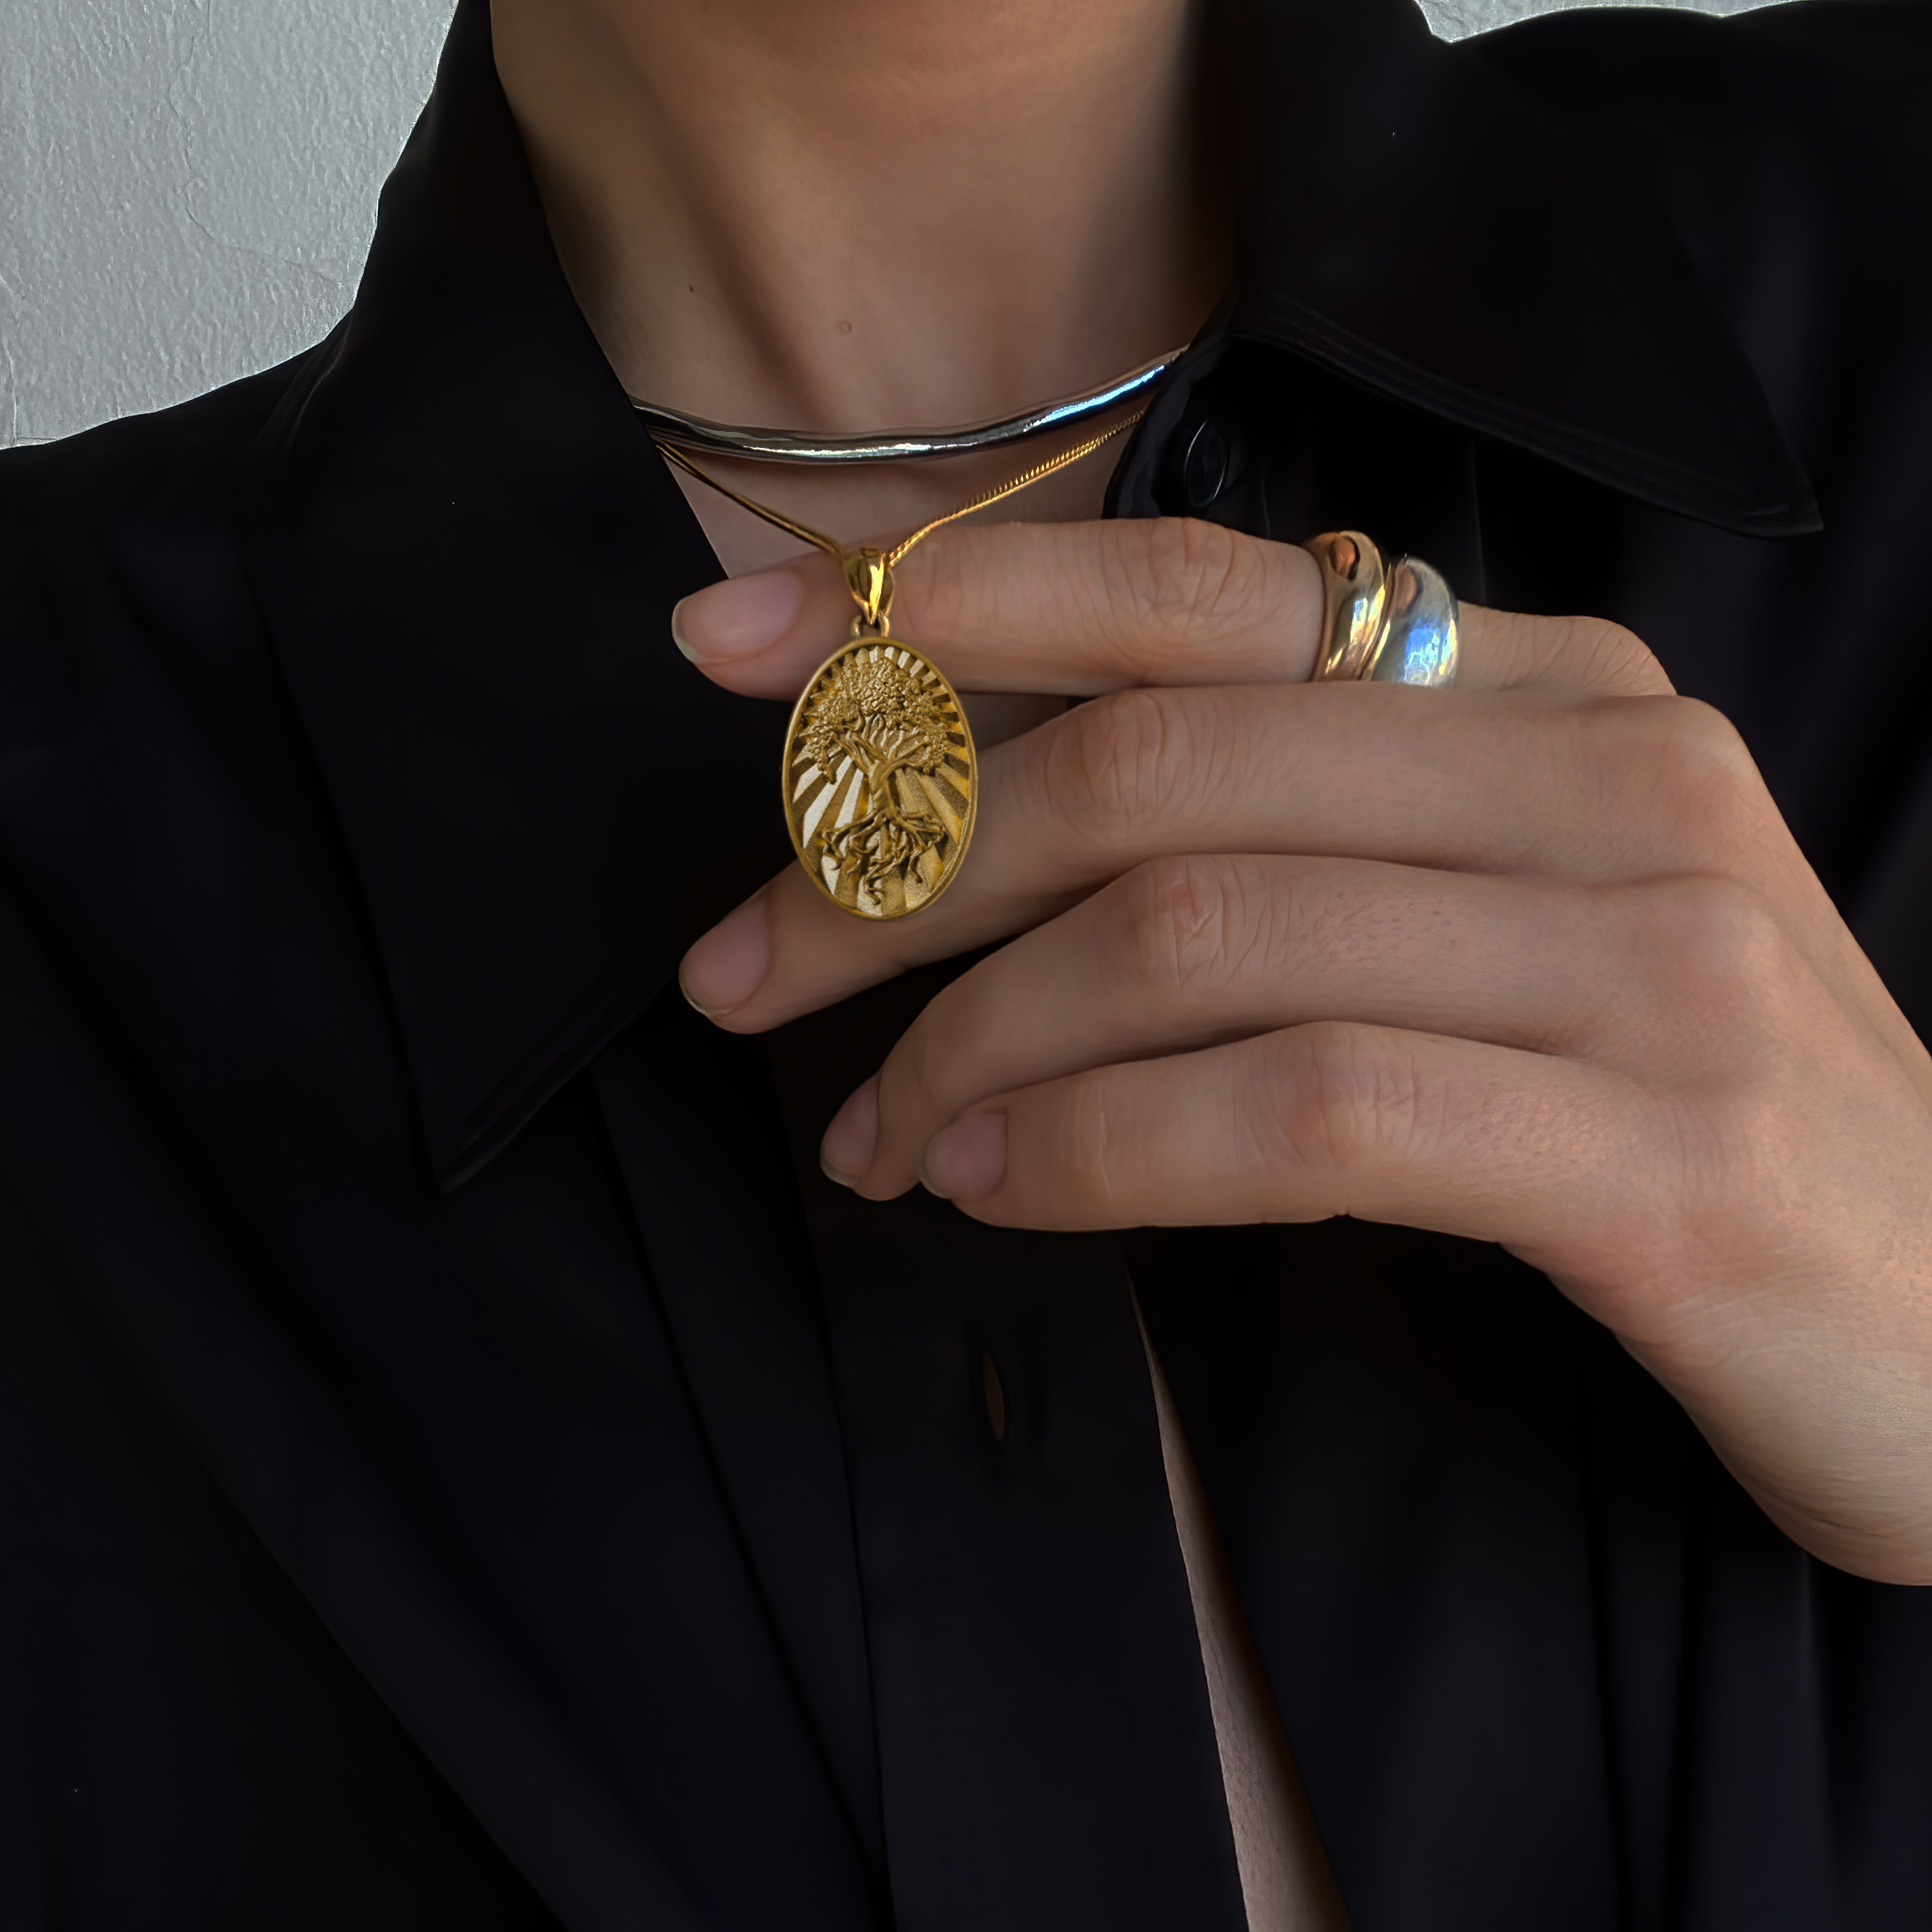 Wearing Your Art: The Rise of Contemporary Art Necklaces